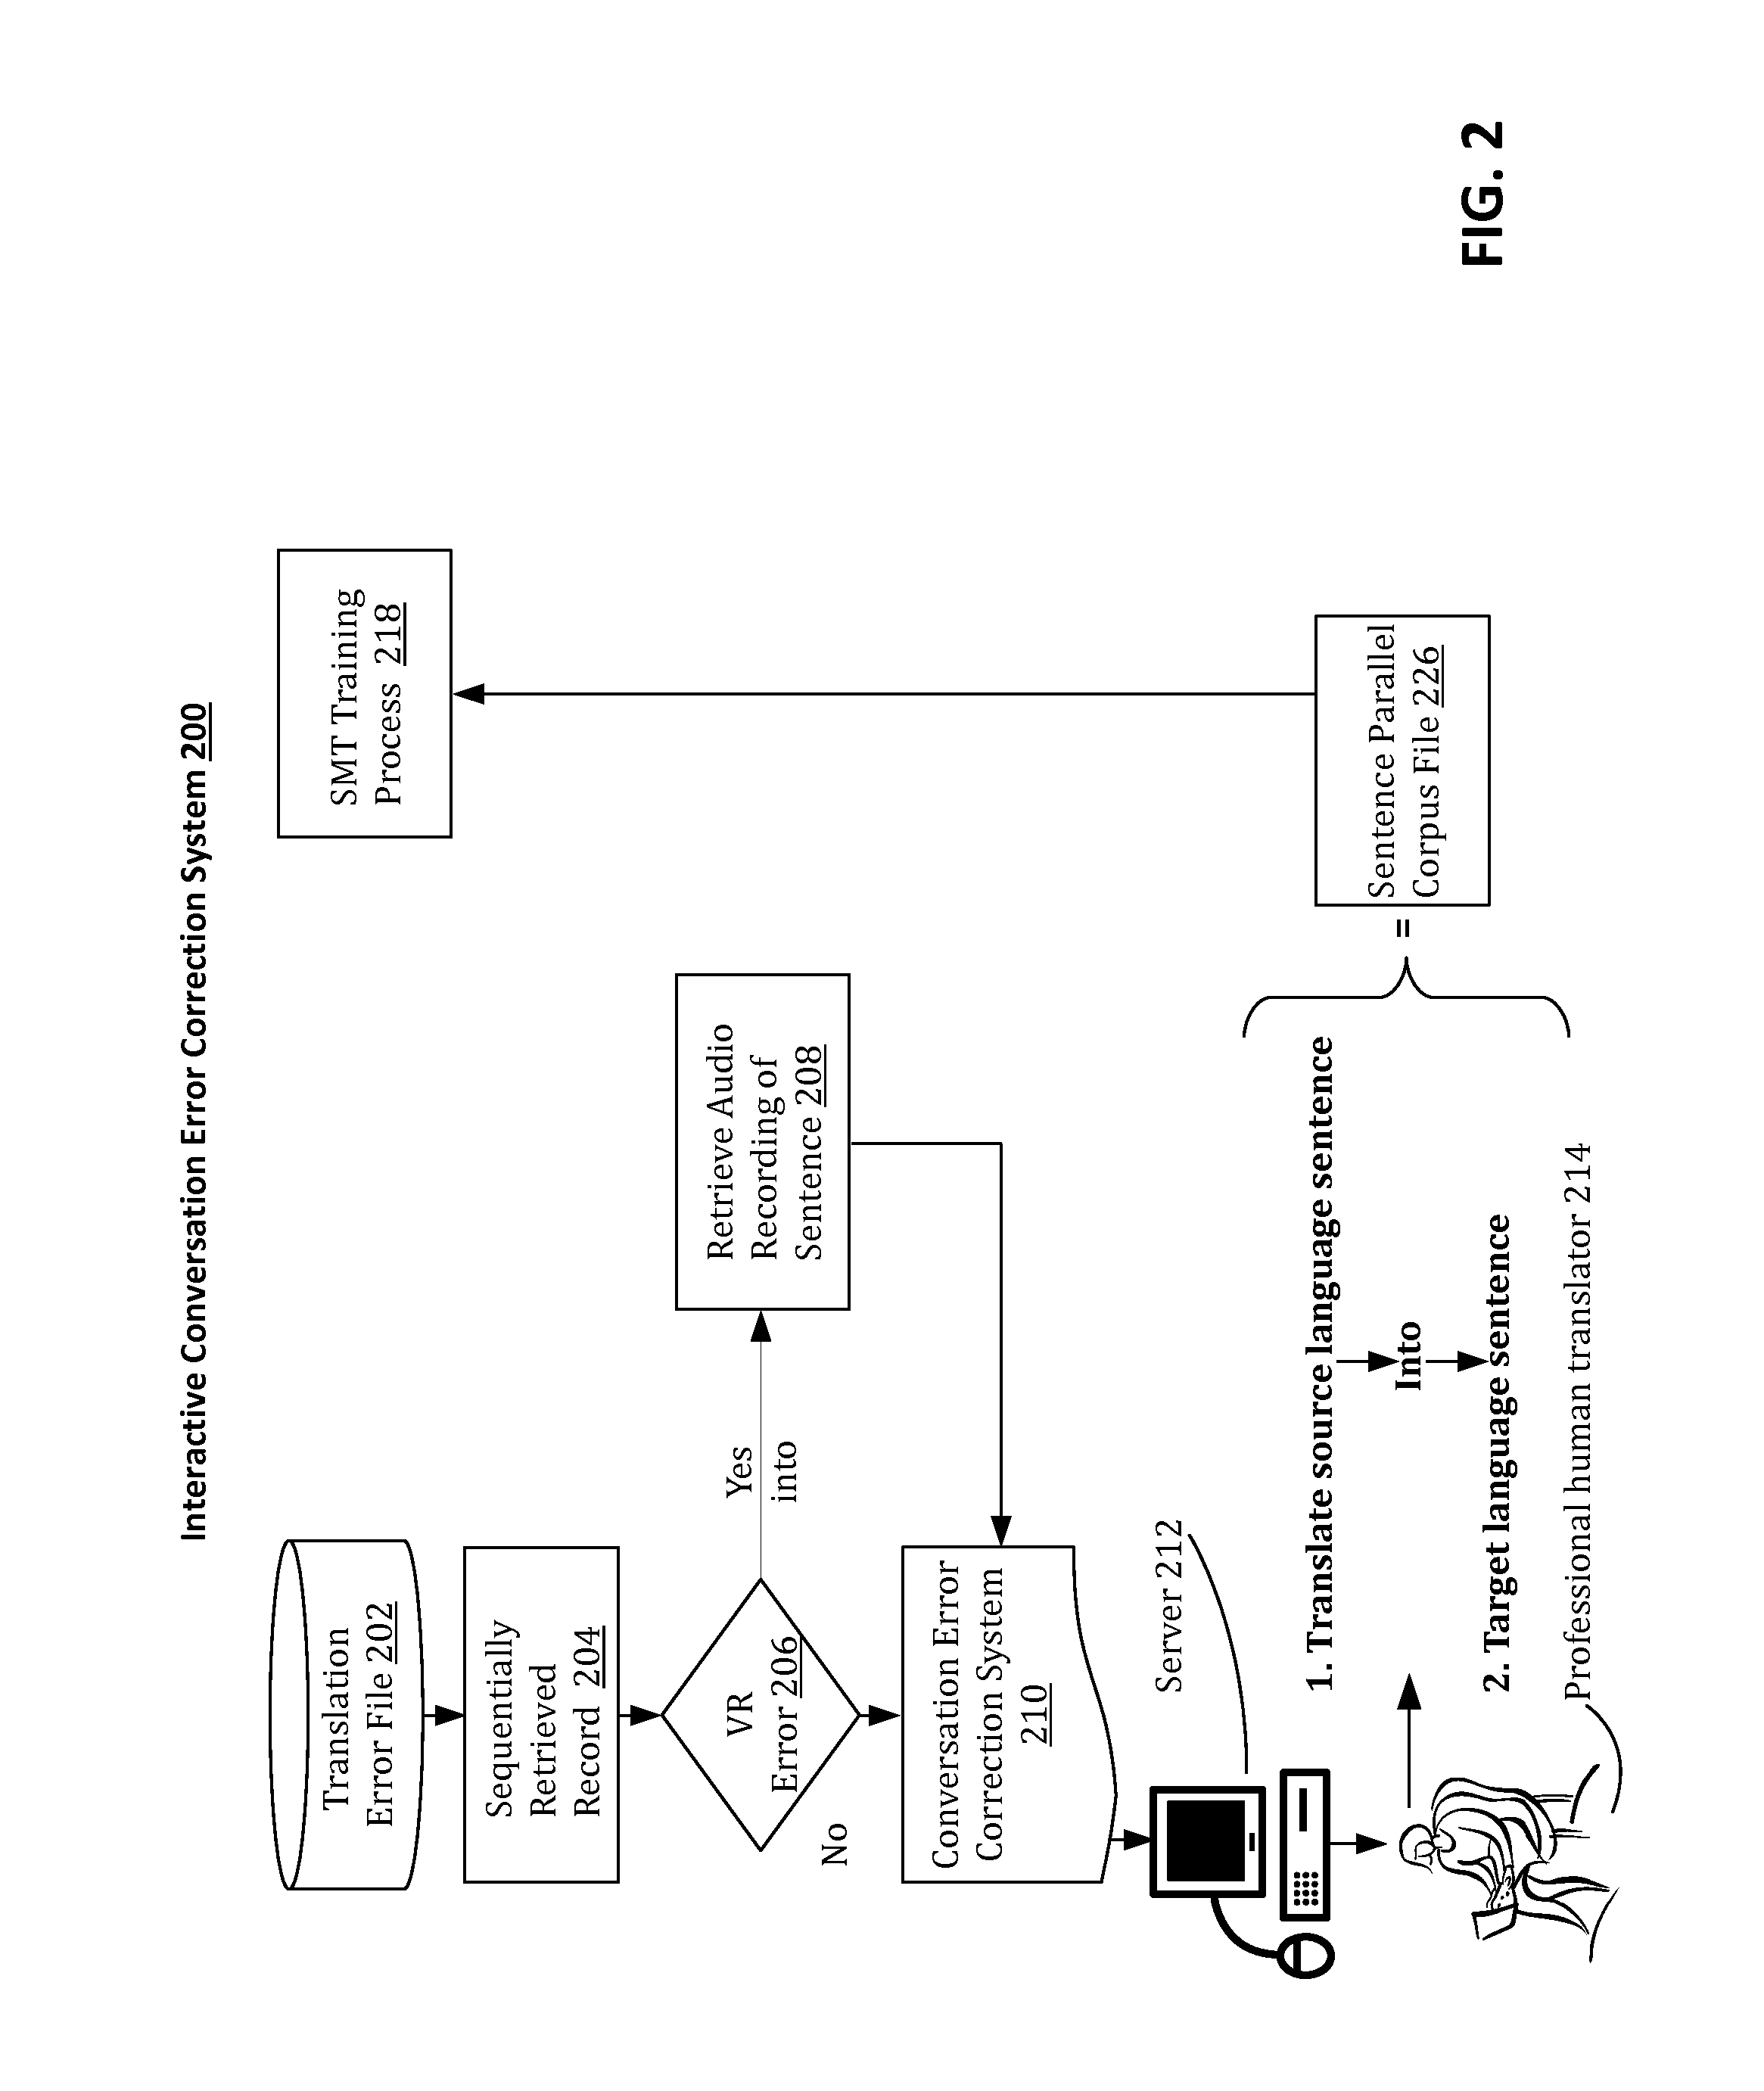 Method for Increasing the Accuracy of Subject-Specific Statistical Machine Translation (SMT)